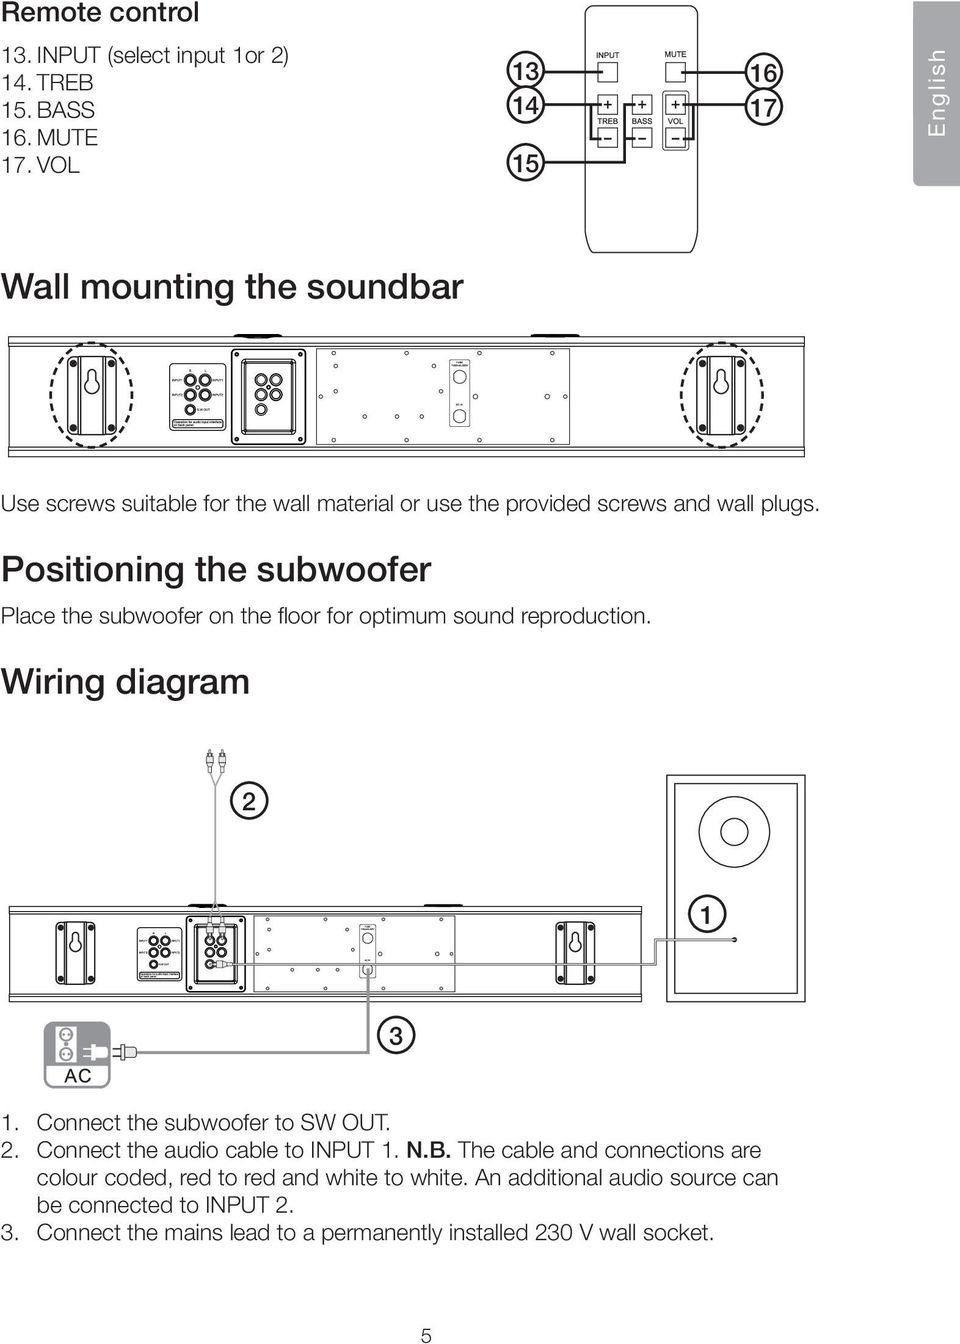 Positioning the subwoofer Place the subwoofer on the floor for optimum sound reproduction. Wiring diagram 2 1 3 1. Connect the subwoofer to SW OUT. 2. Connect the audio cable to INPUT 1.